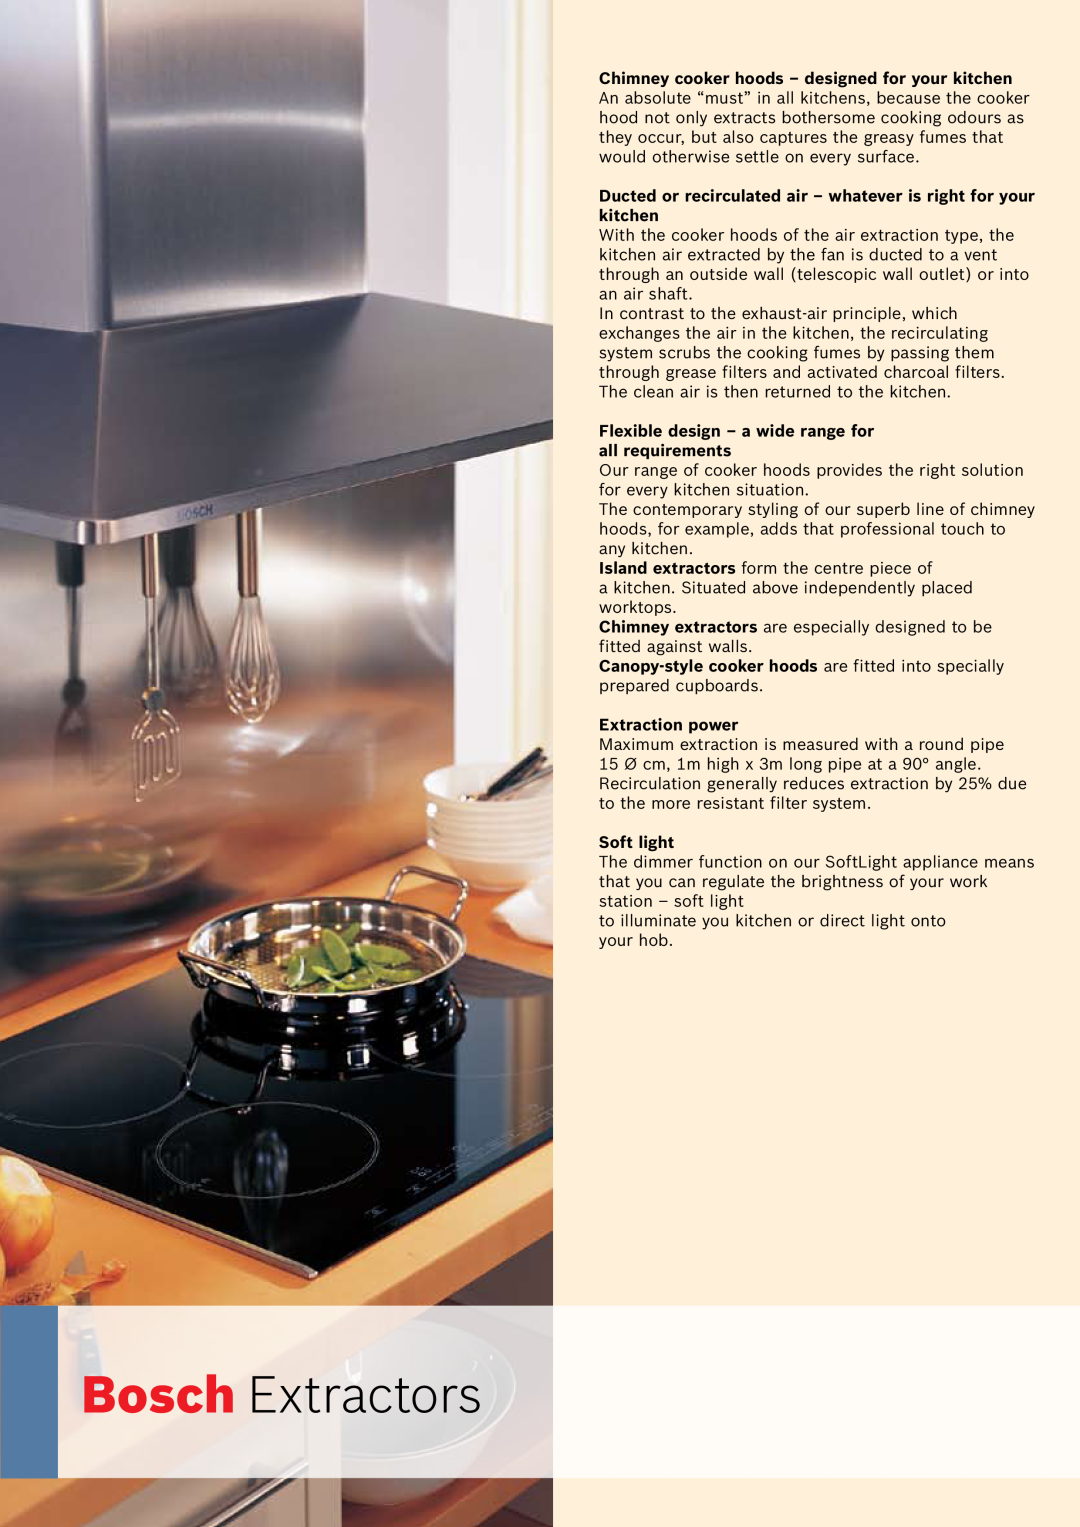 Bosch Appliances Oven Carriage manual Bosch Extractors, Extraction power, Soft light 